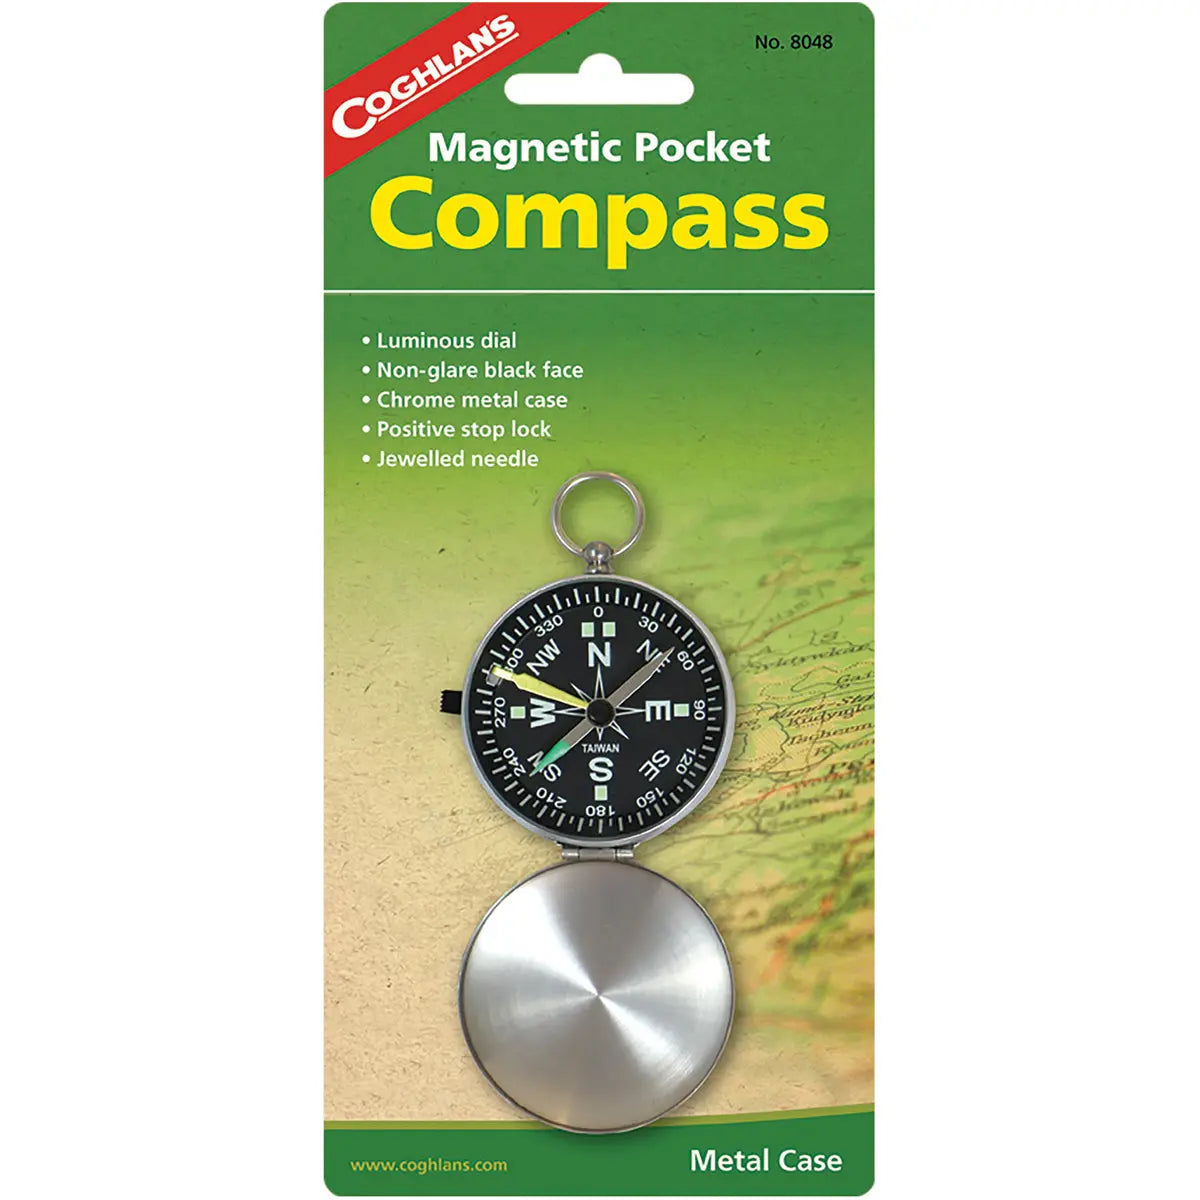 Coghlan's Magnetic Pocket Compass with Metal Case, Luminous Dial, Pocket Size Coghlan's